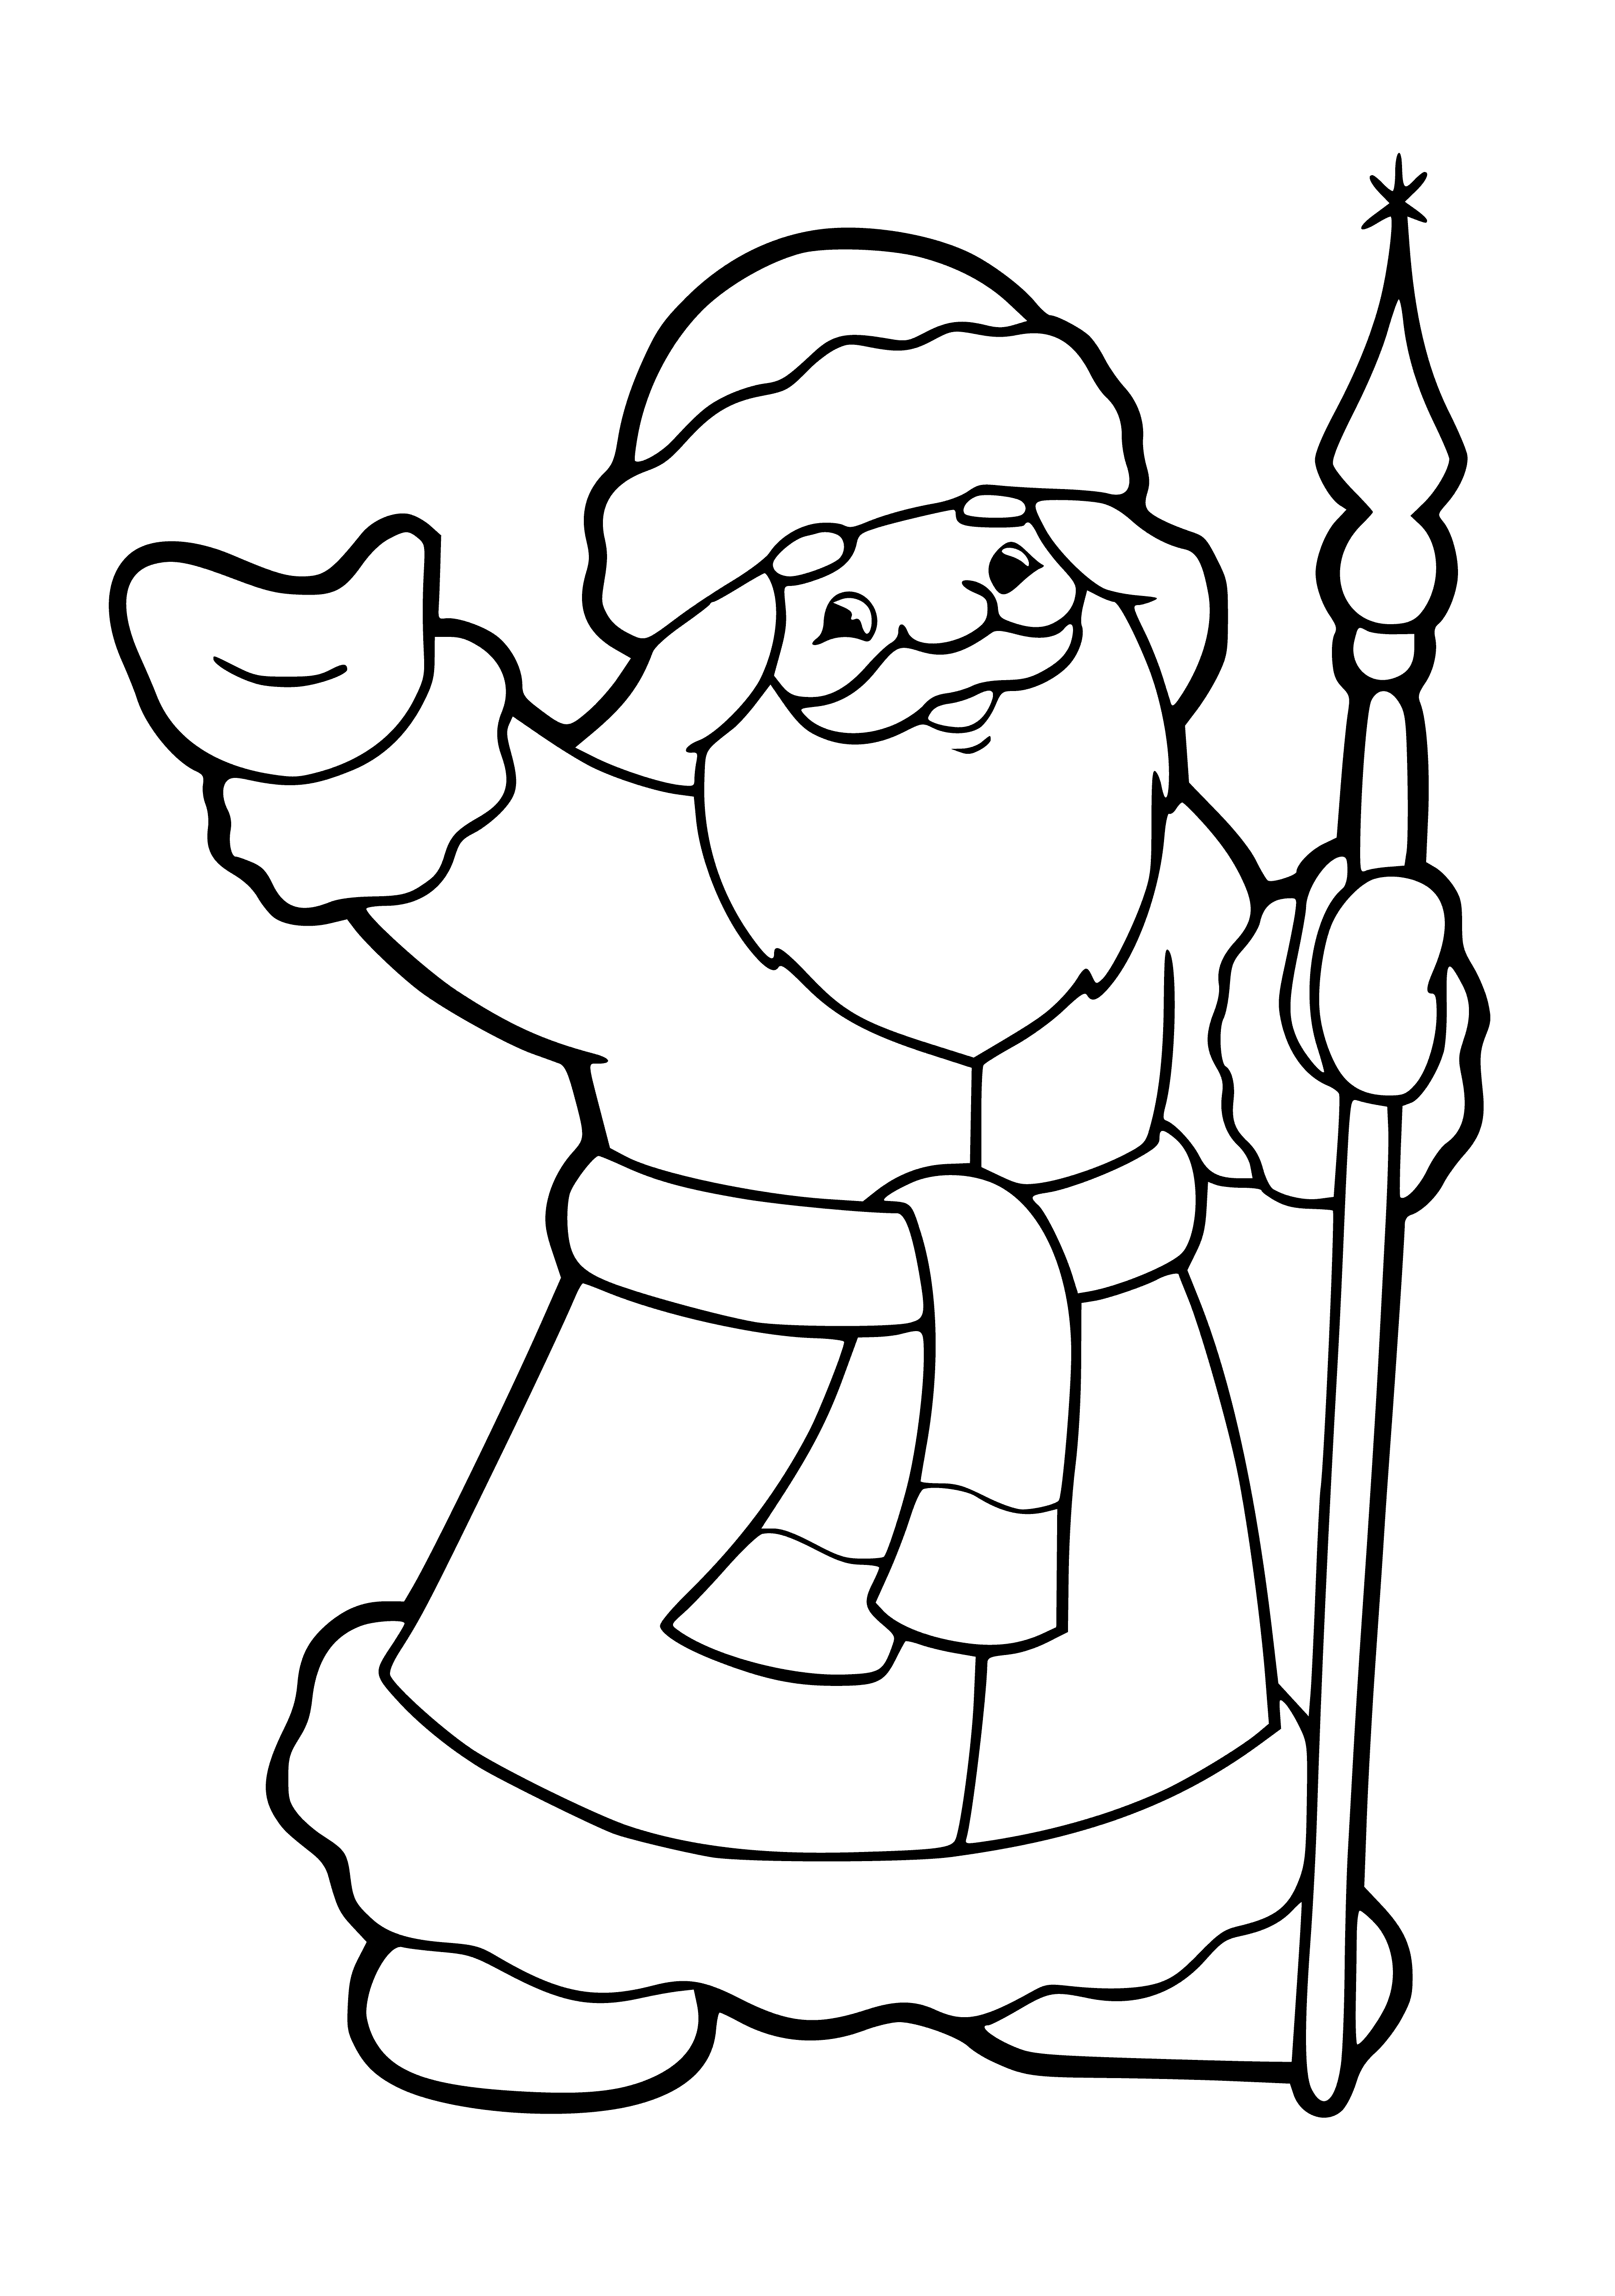 coloring page: Big guy in red suit & hat, furry trim, carrying a wooden staff.